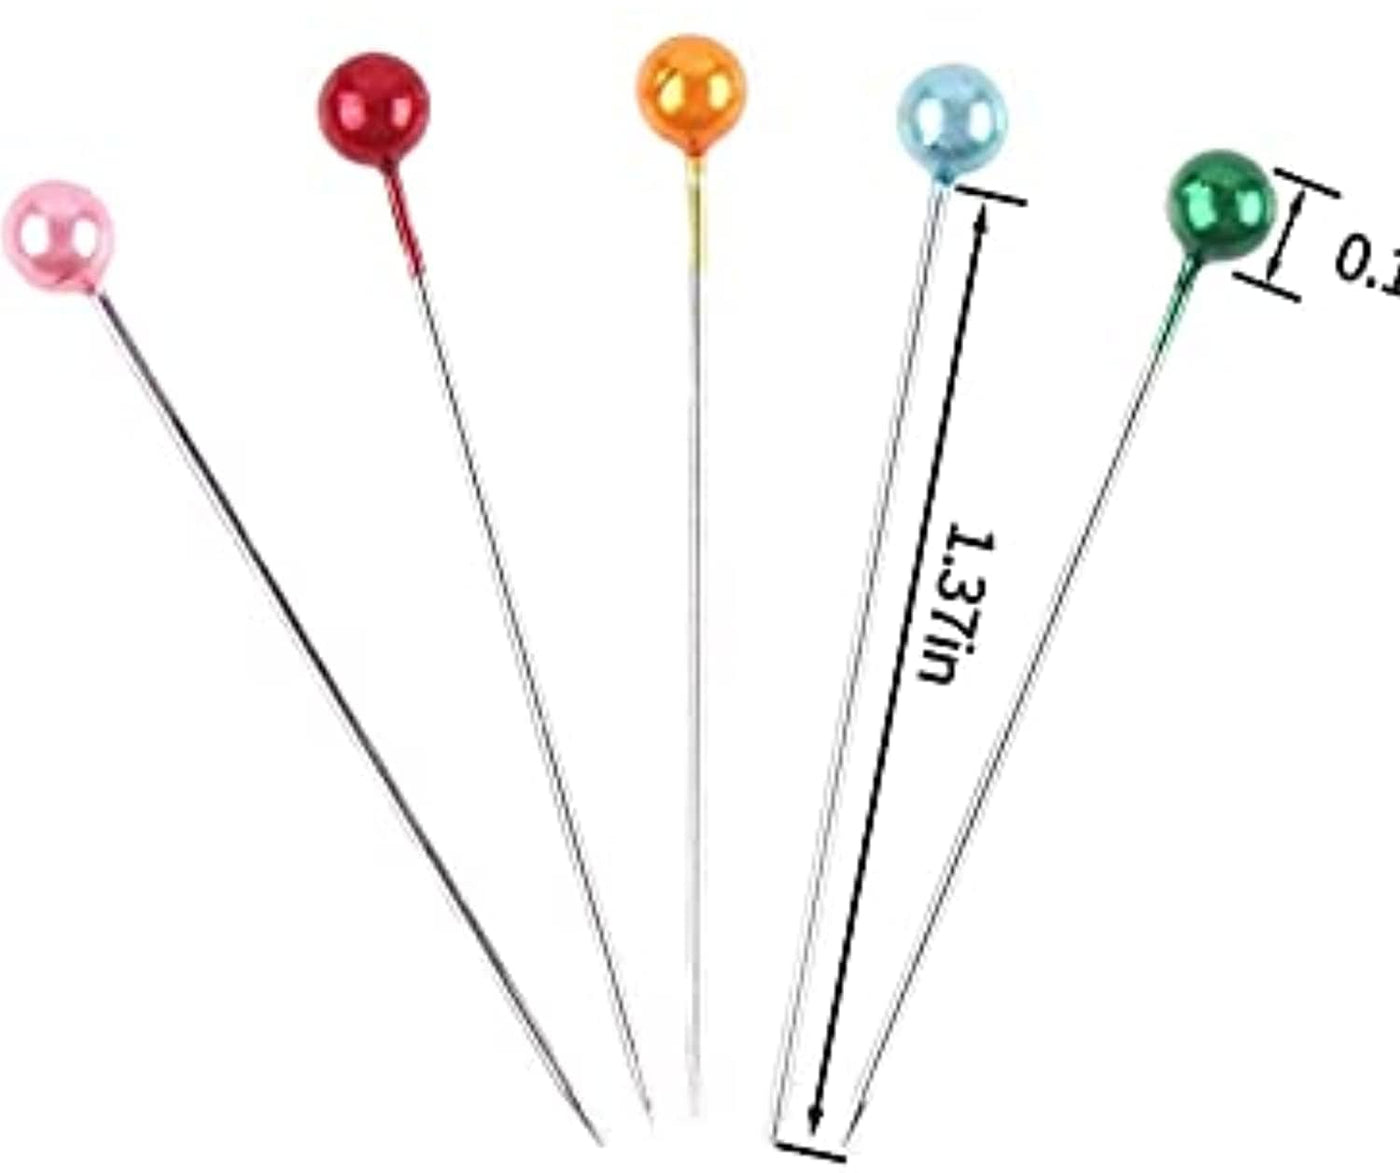 LAMANSH Multicolor / Steel / 480pcs Pins set LAMANSH® Multicolored Steel Head Pins for Tailoring and Dress Making, Patch work Hijab and Scarf Pins etc

( Pack of 480 )